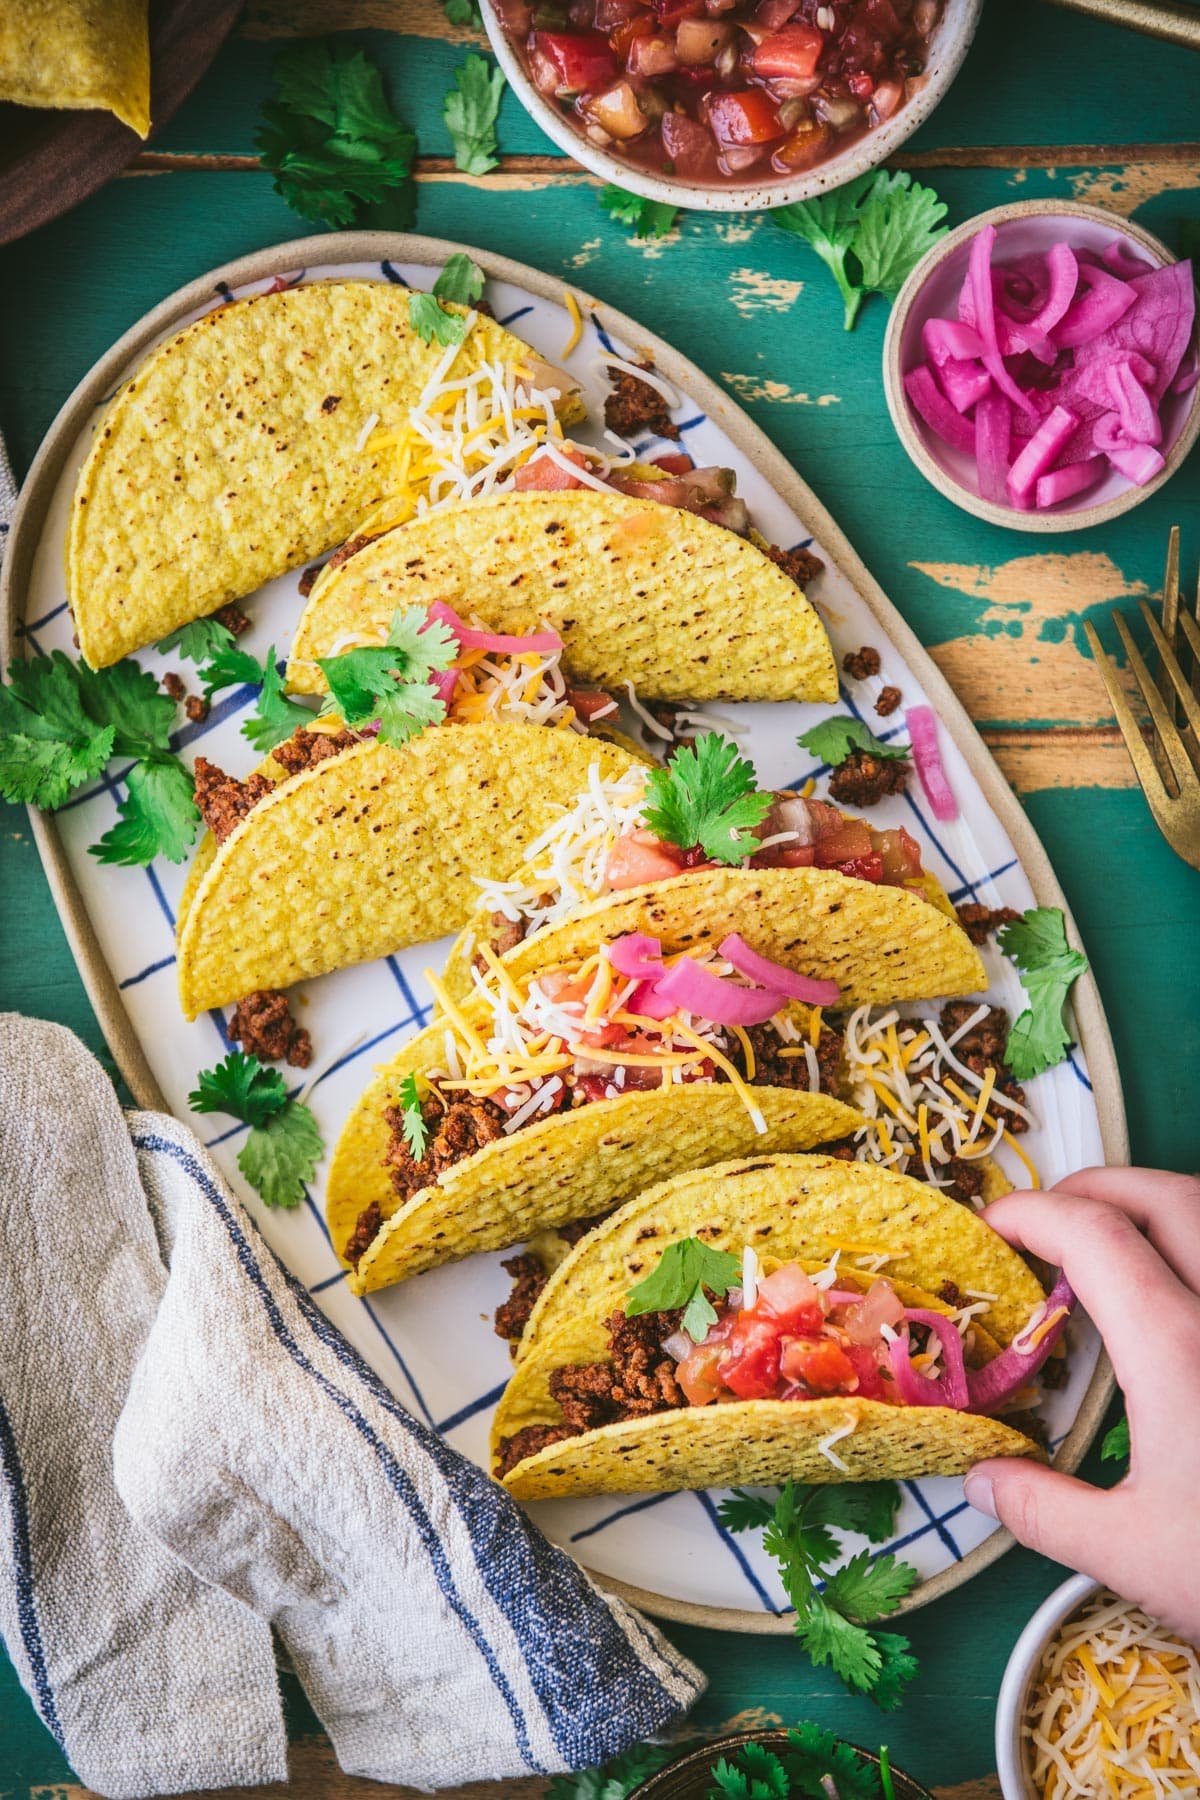 The Best Taco Meat with Homemade Taco Seasoning (+ Video)